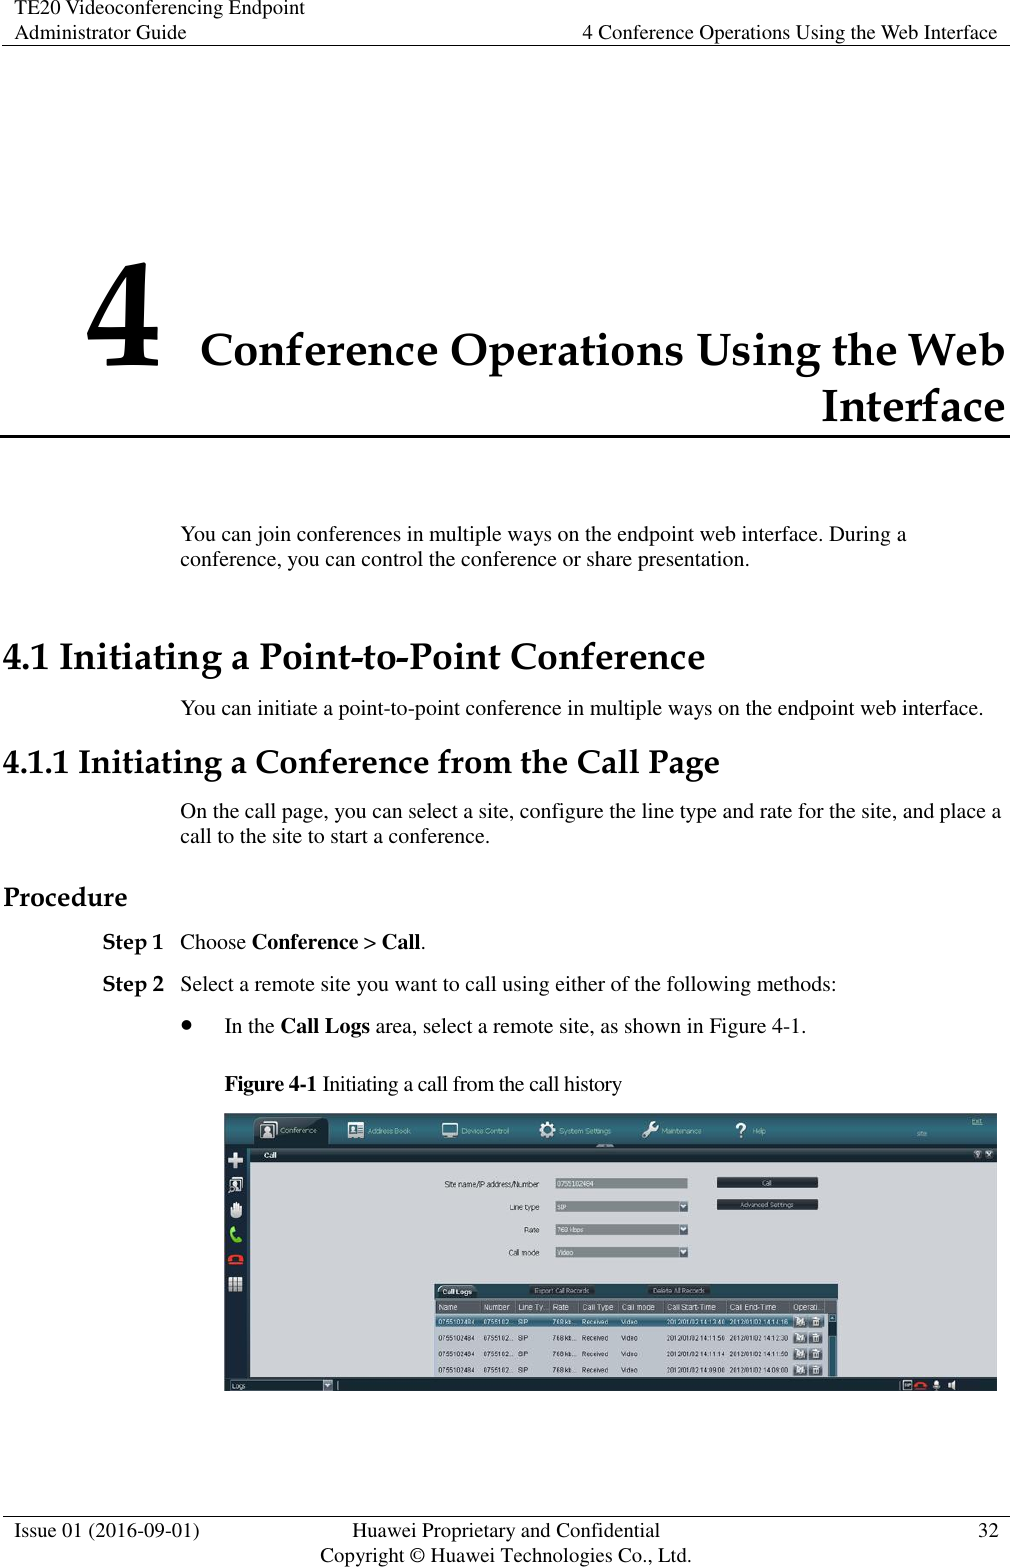 TE20 Videoconferencing Endpoint Administrator Guide 4 Conference Operations Using the Web Interface  Issue 01 (2016-09-01) Huawei Proprietary and Confidential                                     Copyright © Huawei Technologies Co., Ltd. 32  4 Conference Operations Using the Web Interface You can join conferences in multiple ways on the endpoint web interface. During a conference, you can control the conference or share presentation. 4.1 Initiating a Point-to-Point Conference You can initiate a point-to-point conference in multiple ways on the endpoint web interface. 4.1.1 Initiating a Conference from the Call Page On the call page, you can select a site, configure the line type and rate for the site, and place a call to the site to start a conference. Procedure Step 1 Choose Conference &gt; Call. Step 2 Select a remote site you want to call using either of the following methods:  In the Call Logs area, select a remote site, as shown in Figure 4-1. Figure 4-1 Initiating a call from the call history   